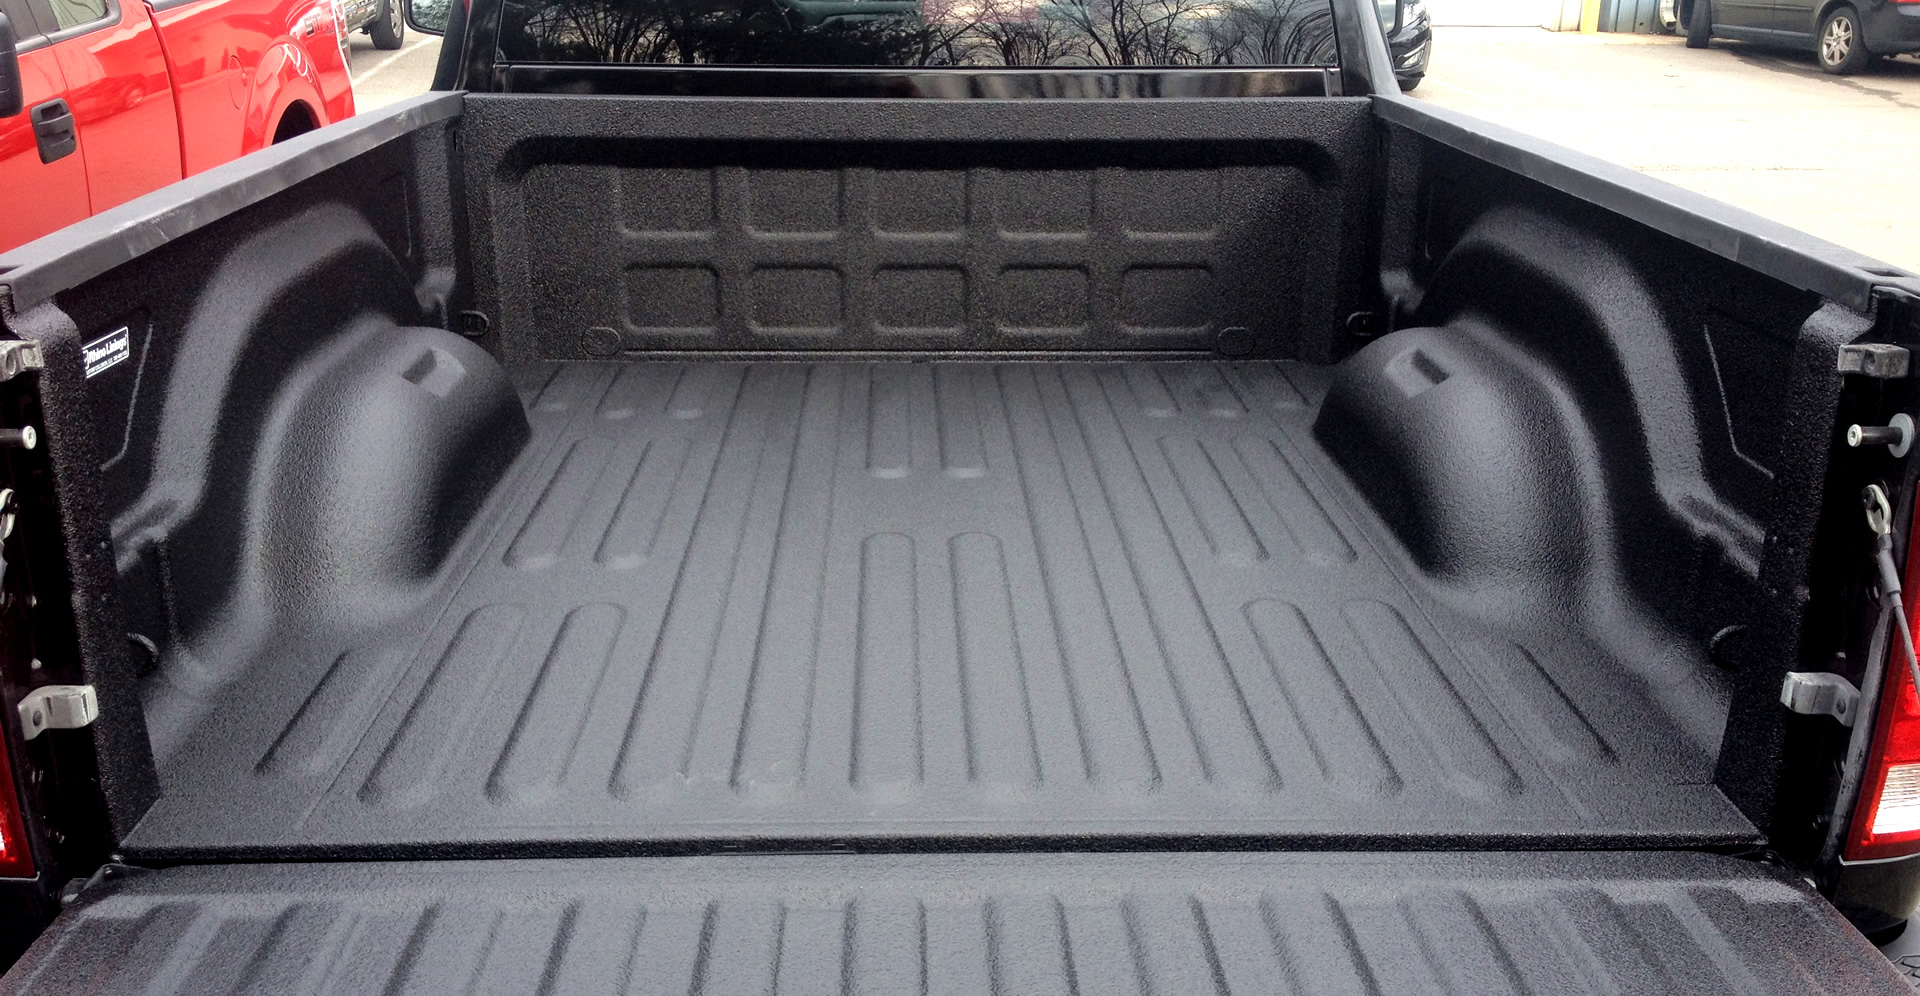 Cargo bed of a truck